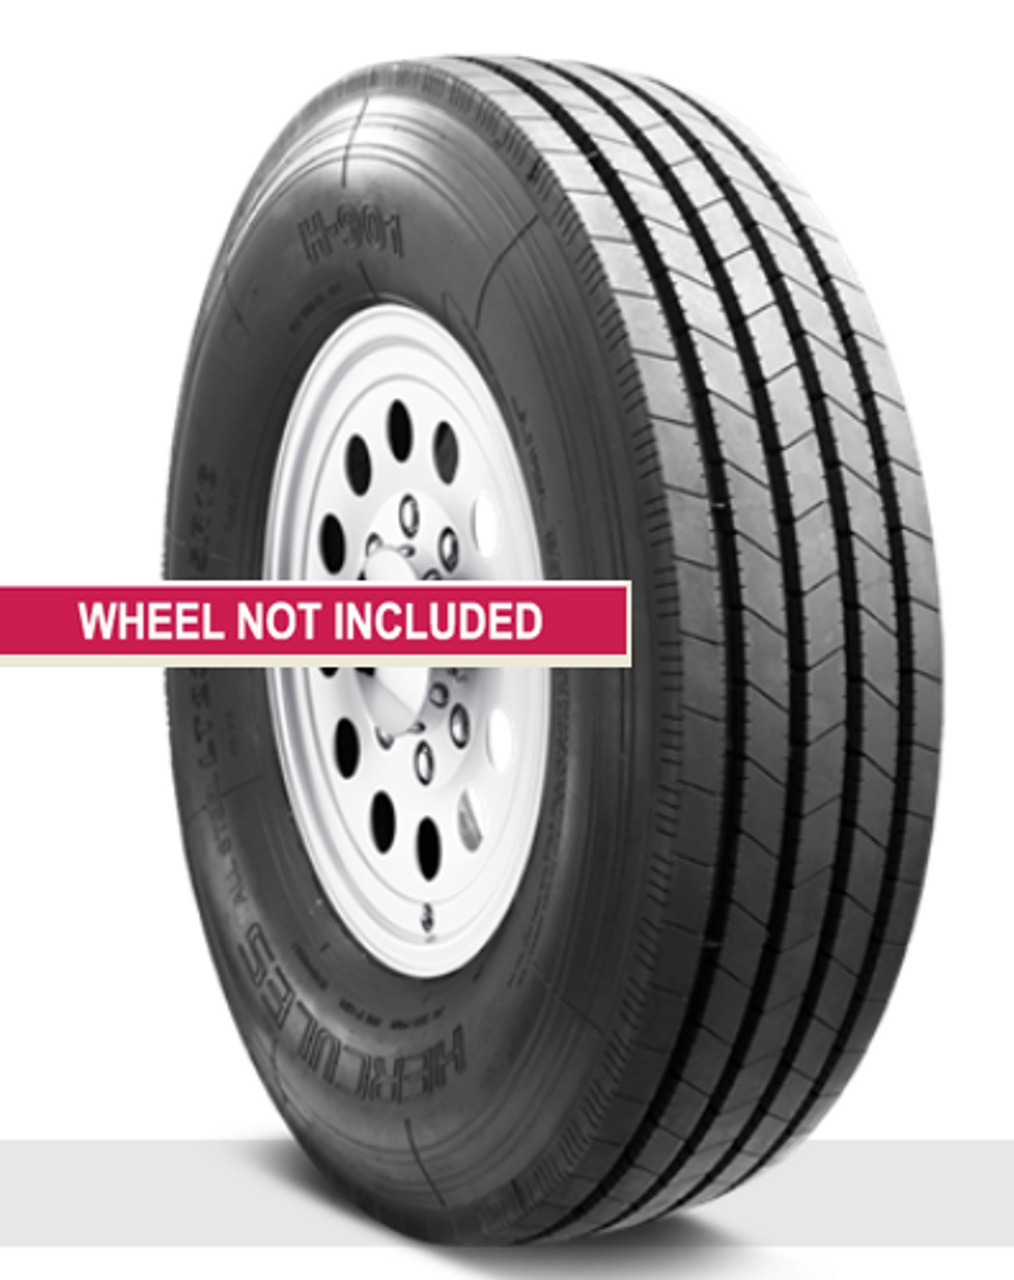 New Tire 225 75 15 Hercules H-901 All Steel ST Trailer 12 Ply ST225 Hercules Trailer Tires 225 75r15 Review